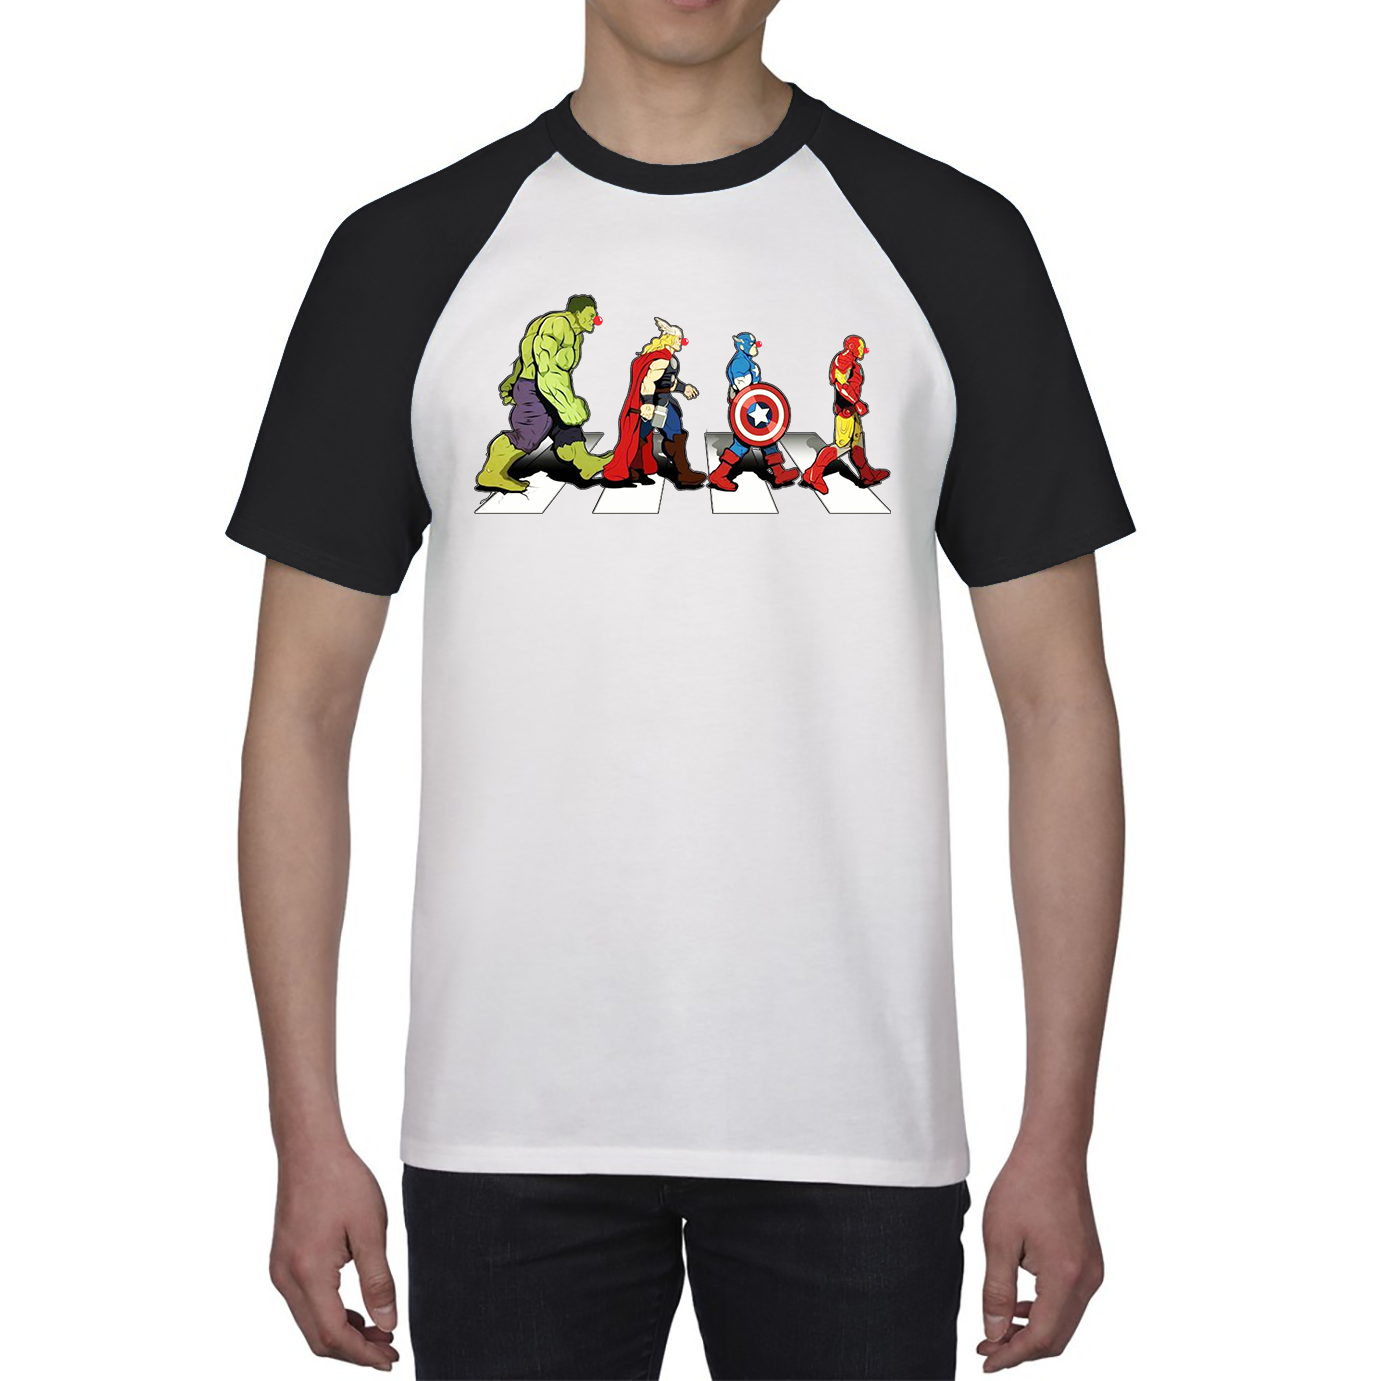 Hulk Thor Captain America Iron Man Marvel Avengers Abbey Road Red Nose Day Baseball T Shirt. 50% Goes To Charity